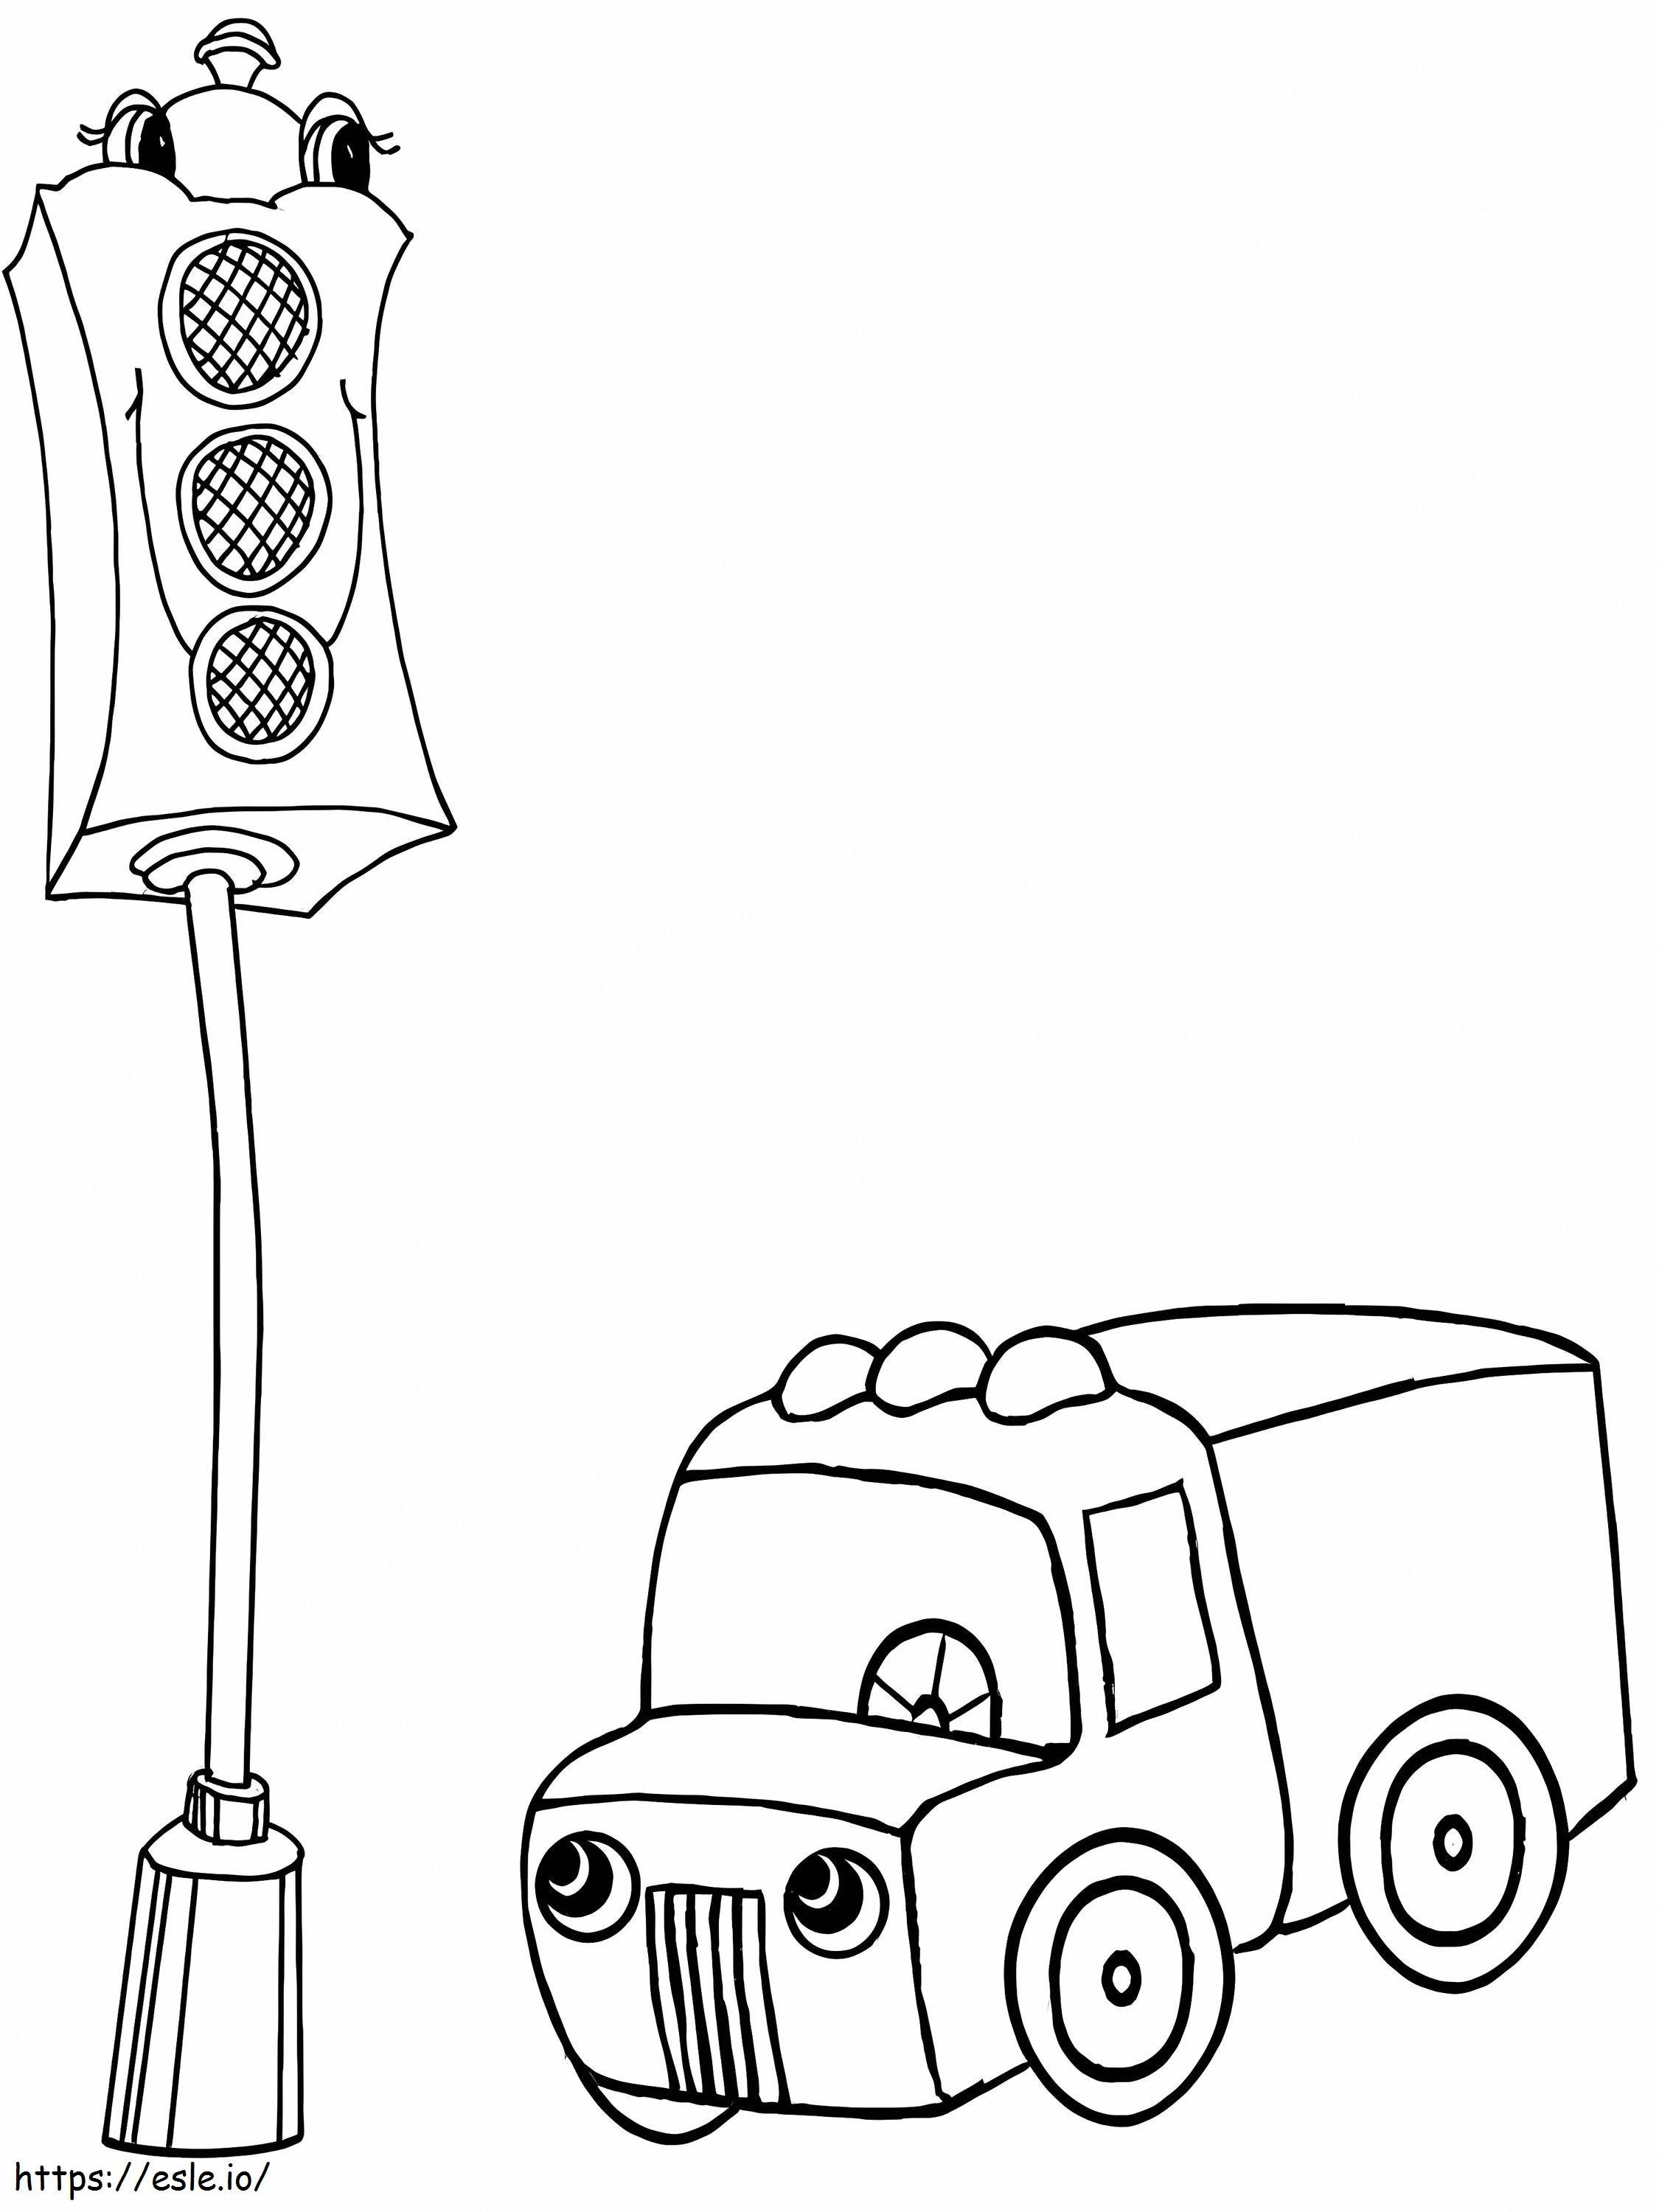 Cute Car And Traffic Light coloring page